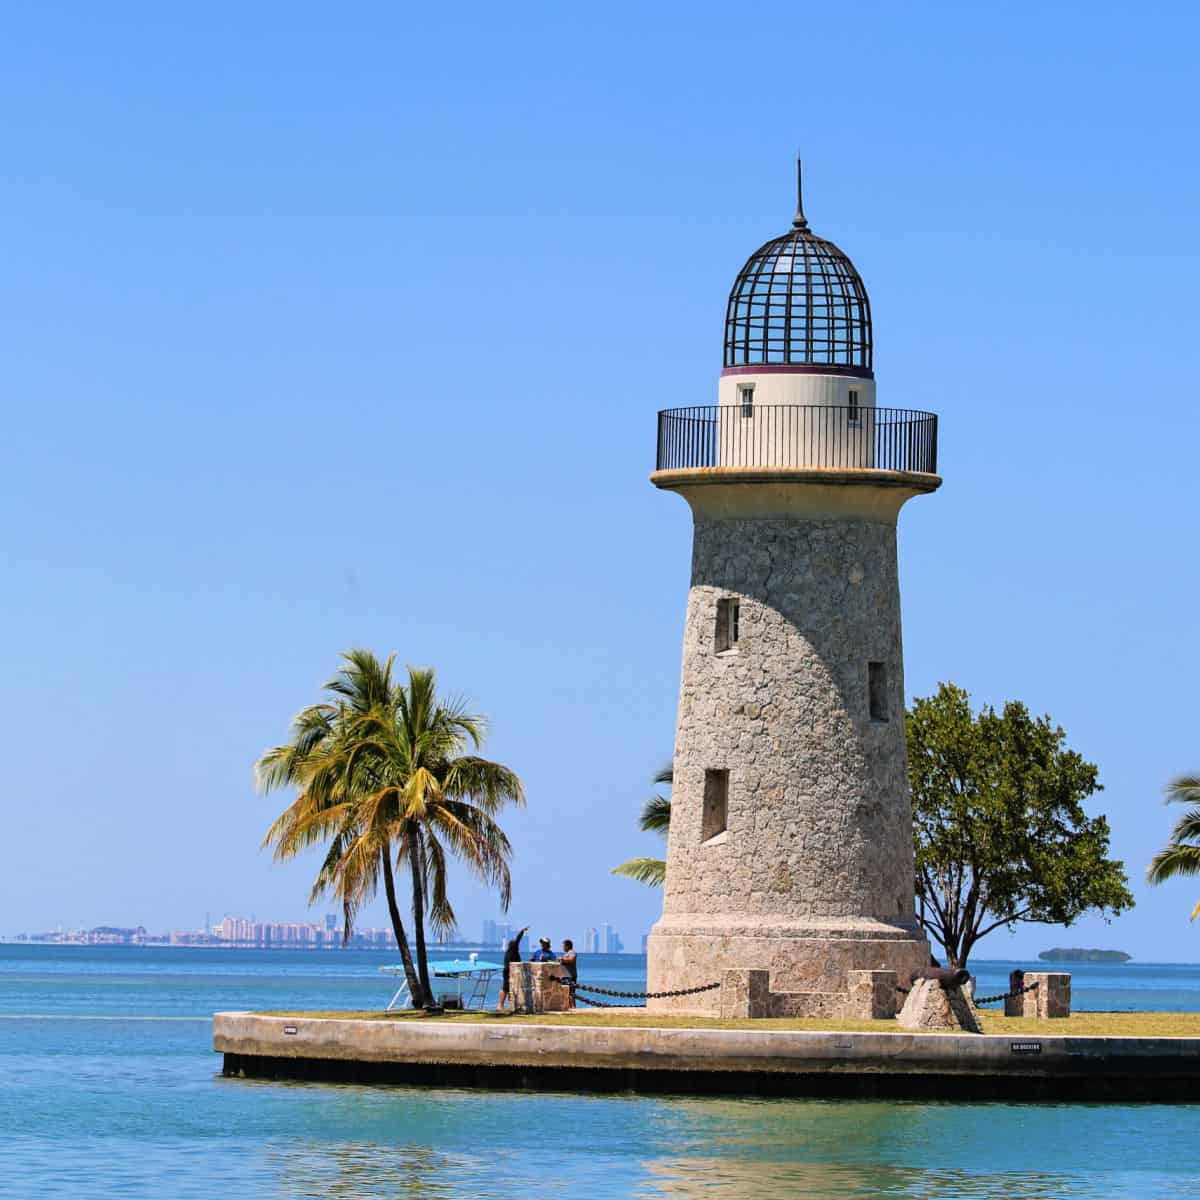 Boca Chita Key Lighthouse with Miami Cityline in background at Biscayne National Park